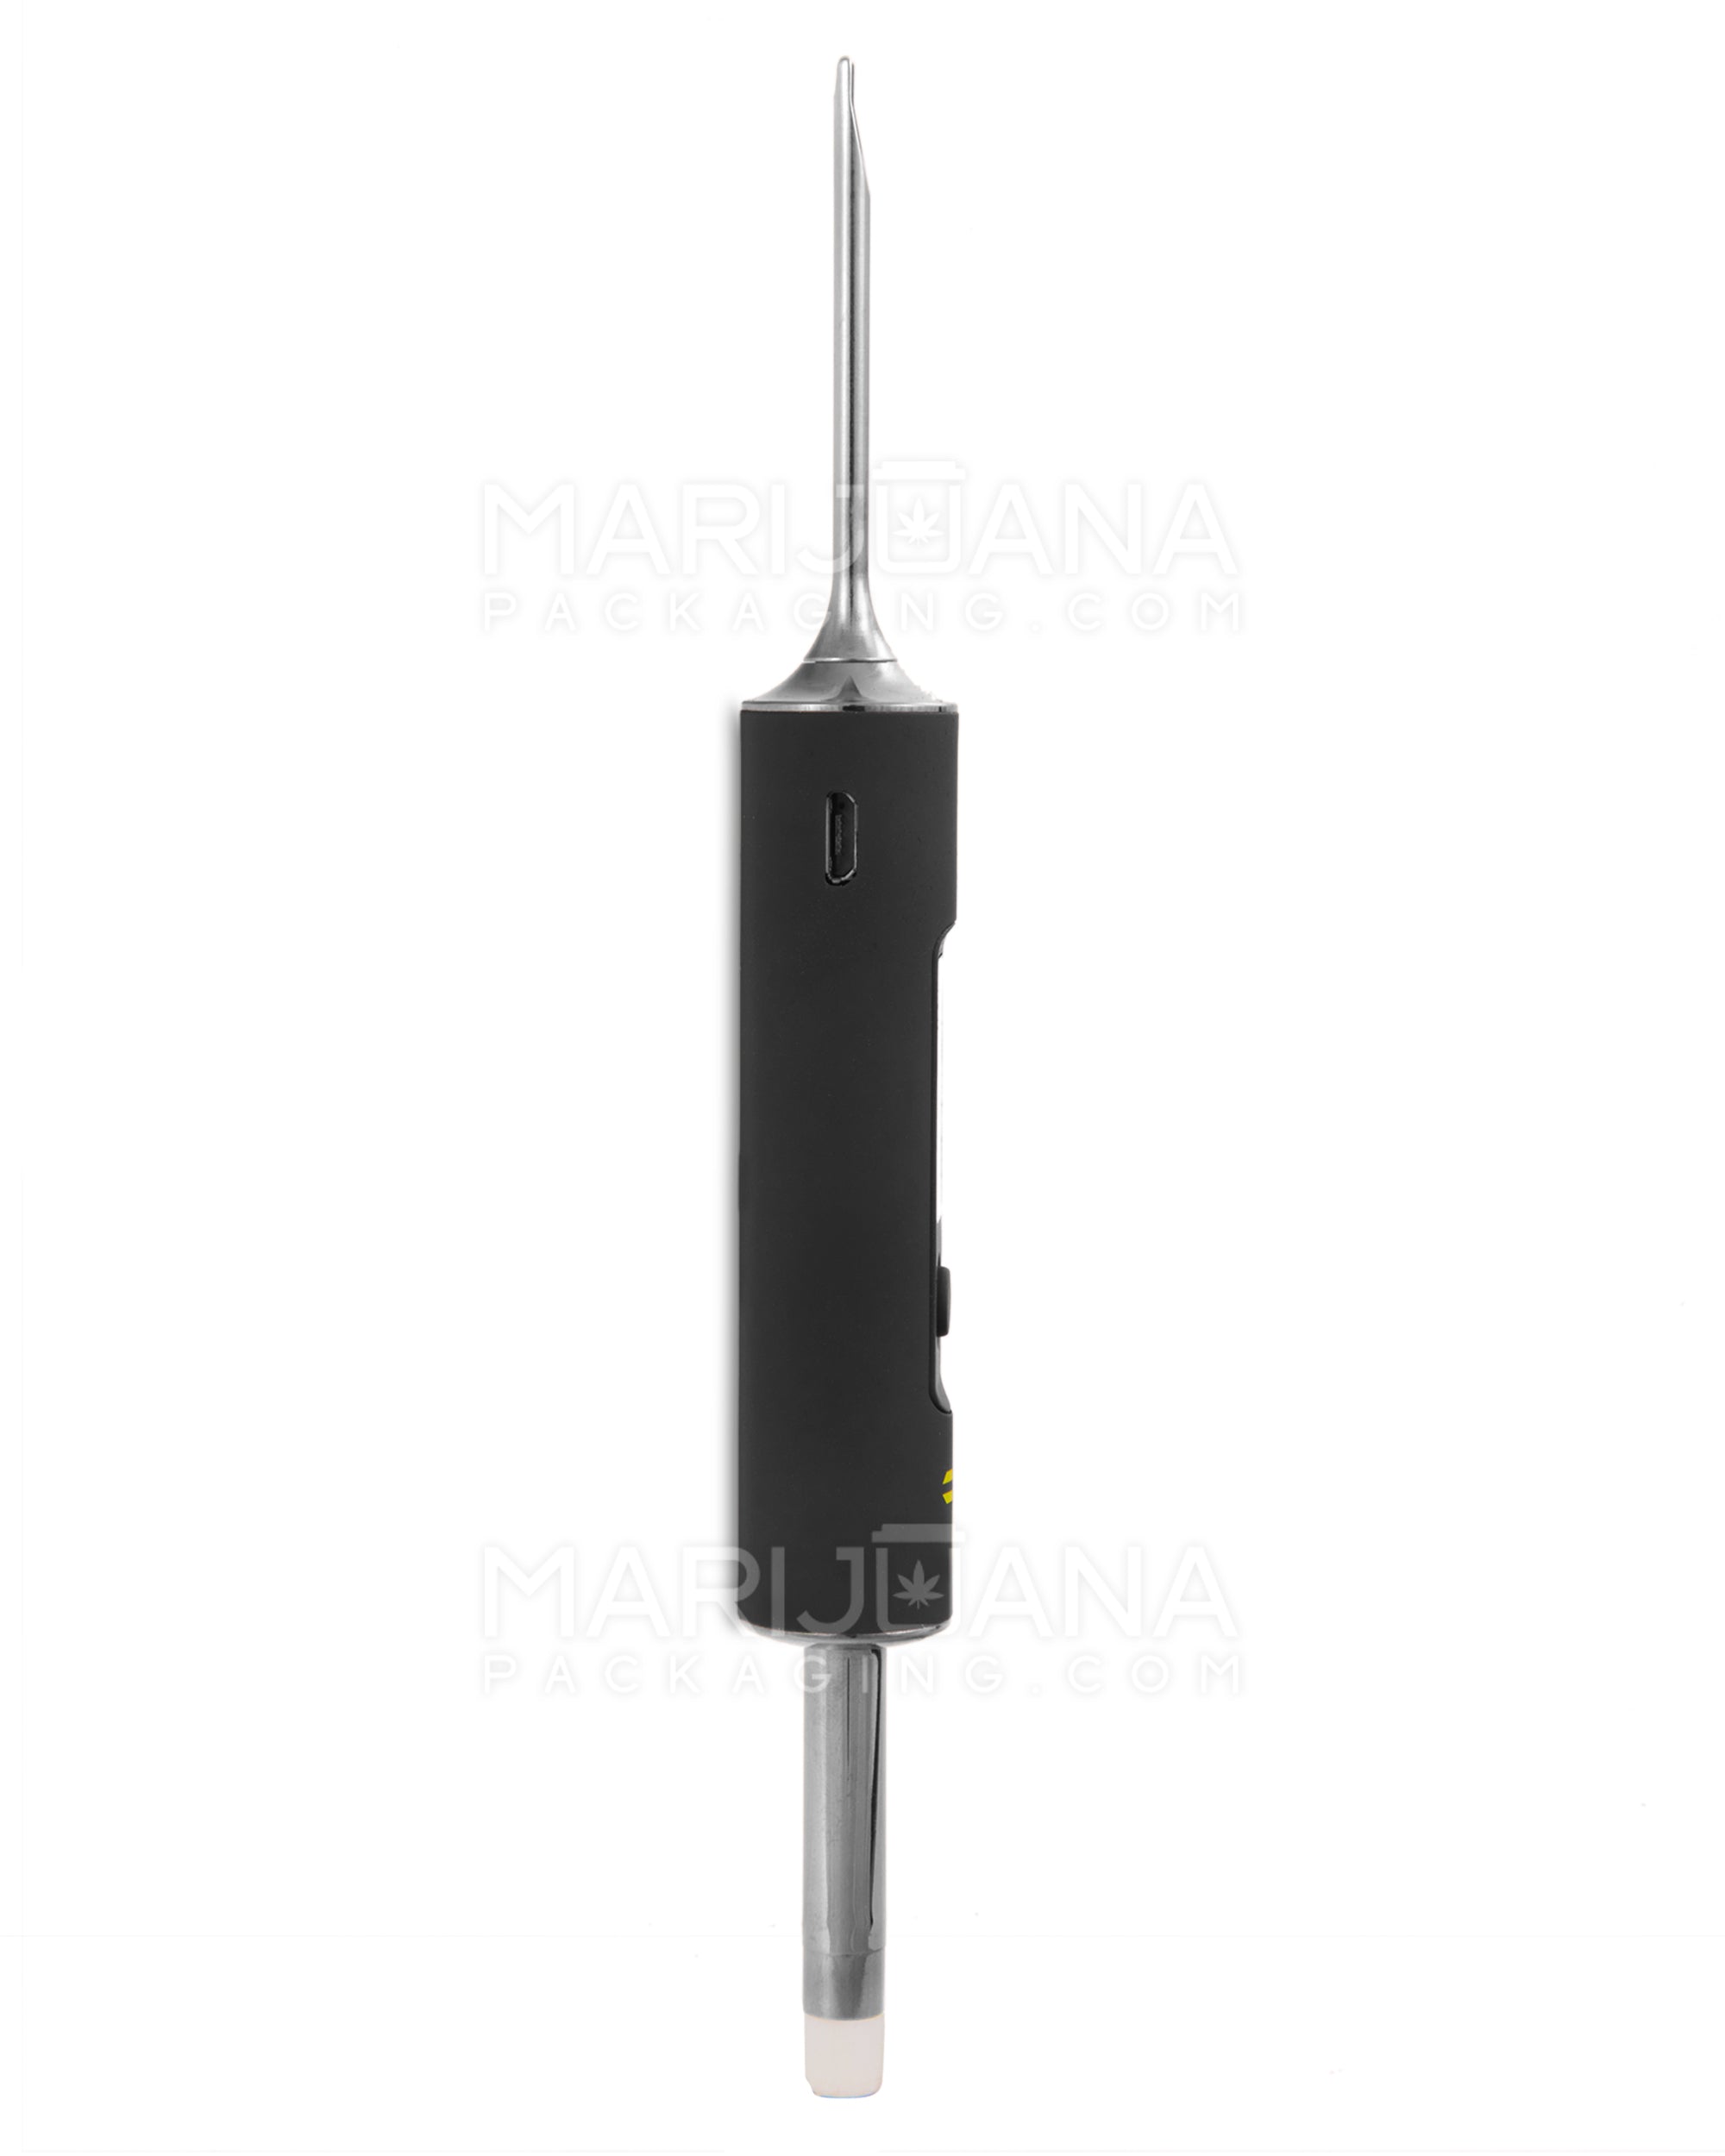 TERPOMETER | Temperature Indicating Thermometer Dab Tool w/ USB Cable | 6.5in Long - Titanium - Black - 2